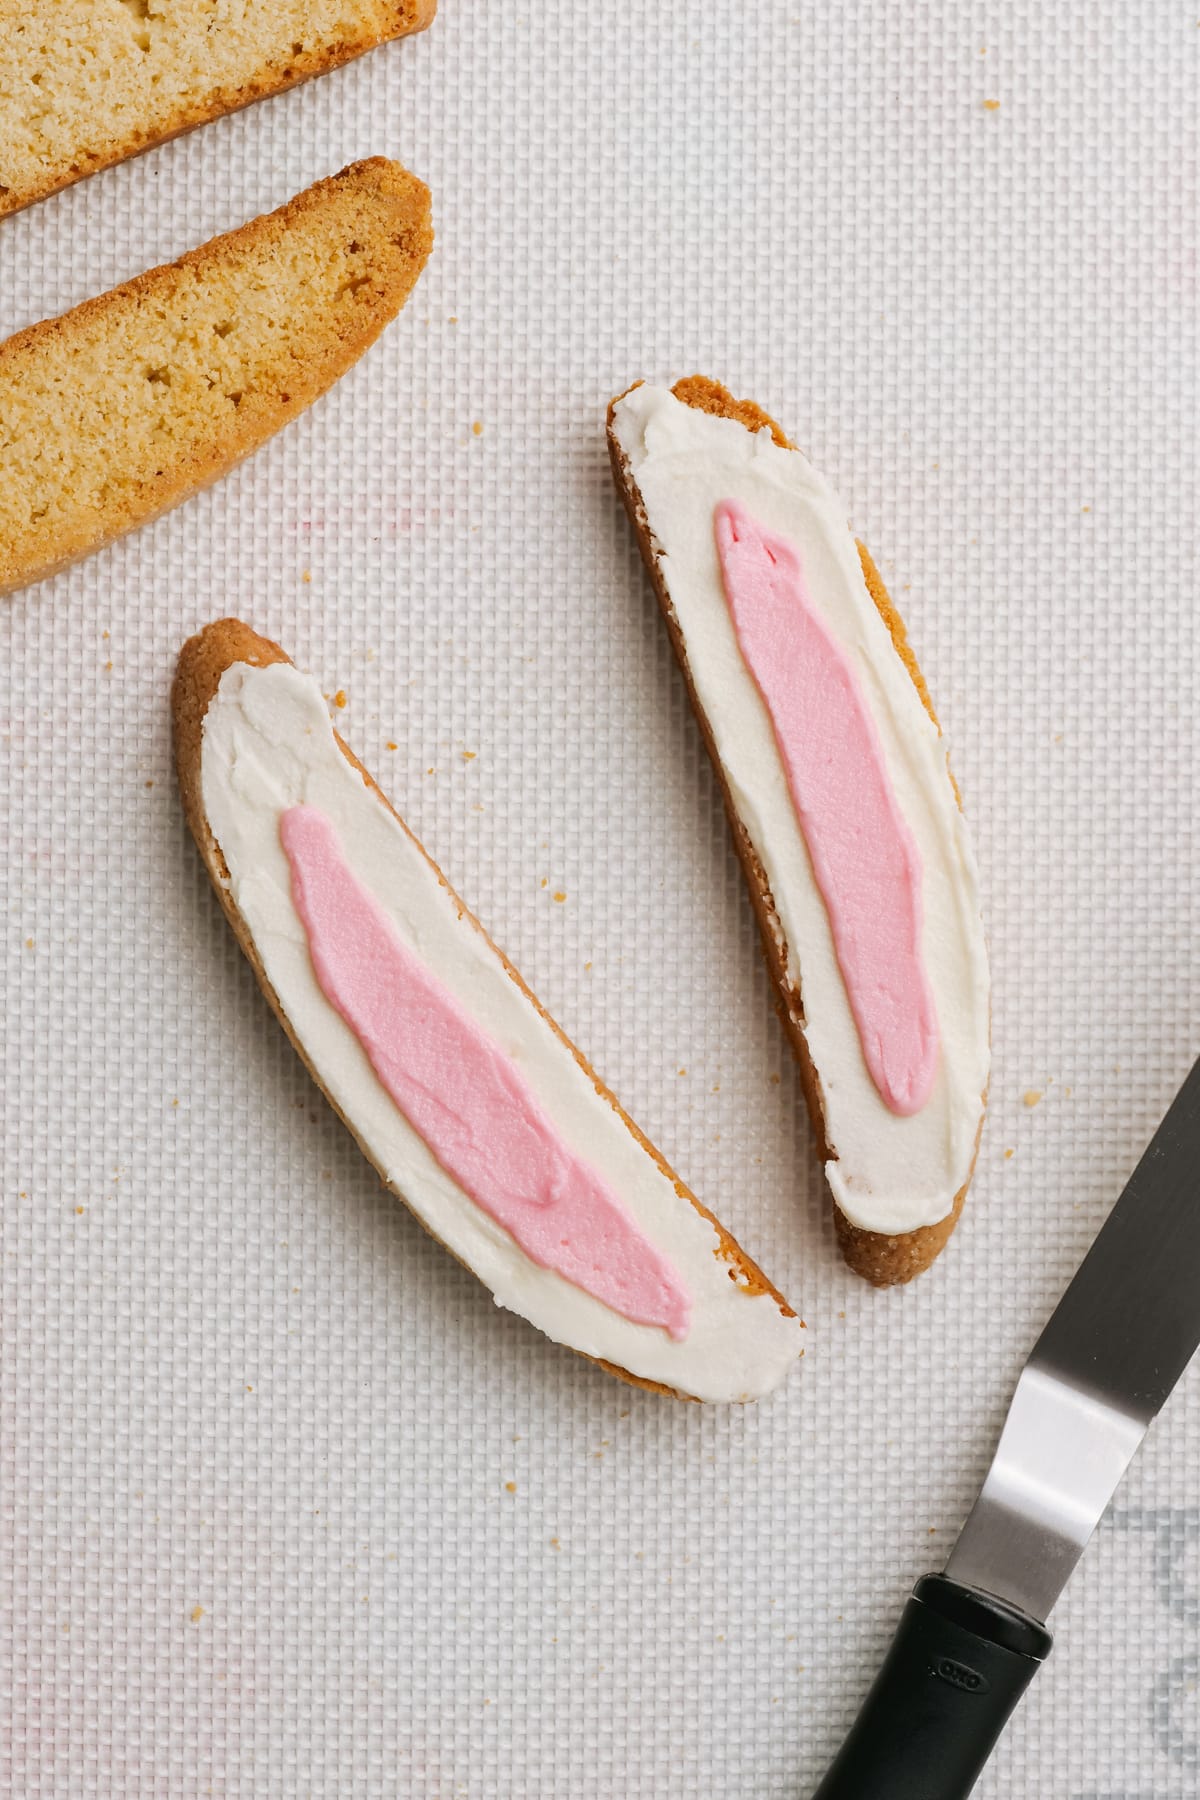 Frosted Biscotti with white frosting and pink frosting in the center